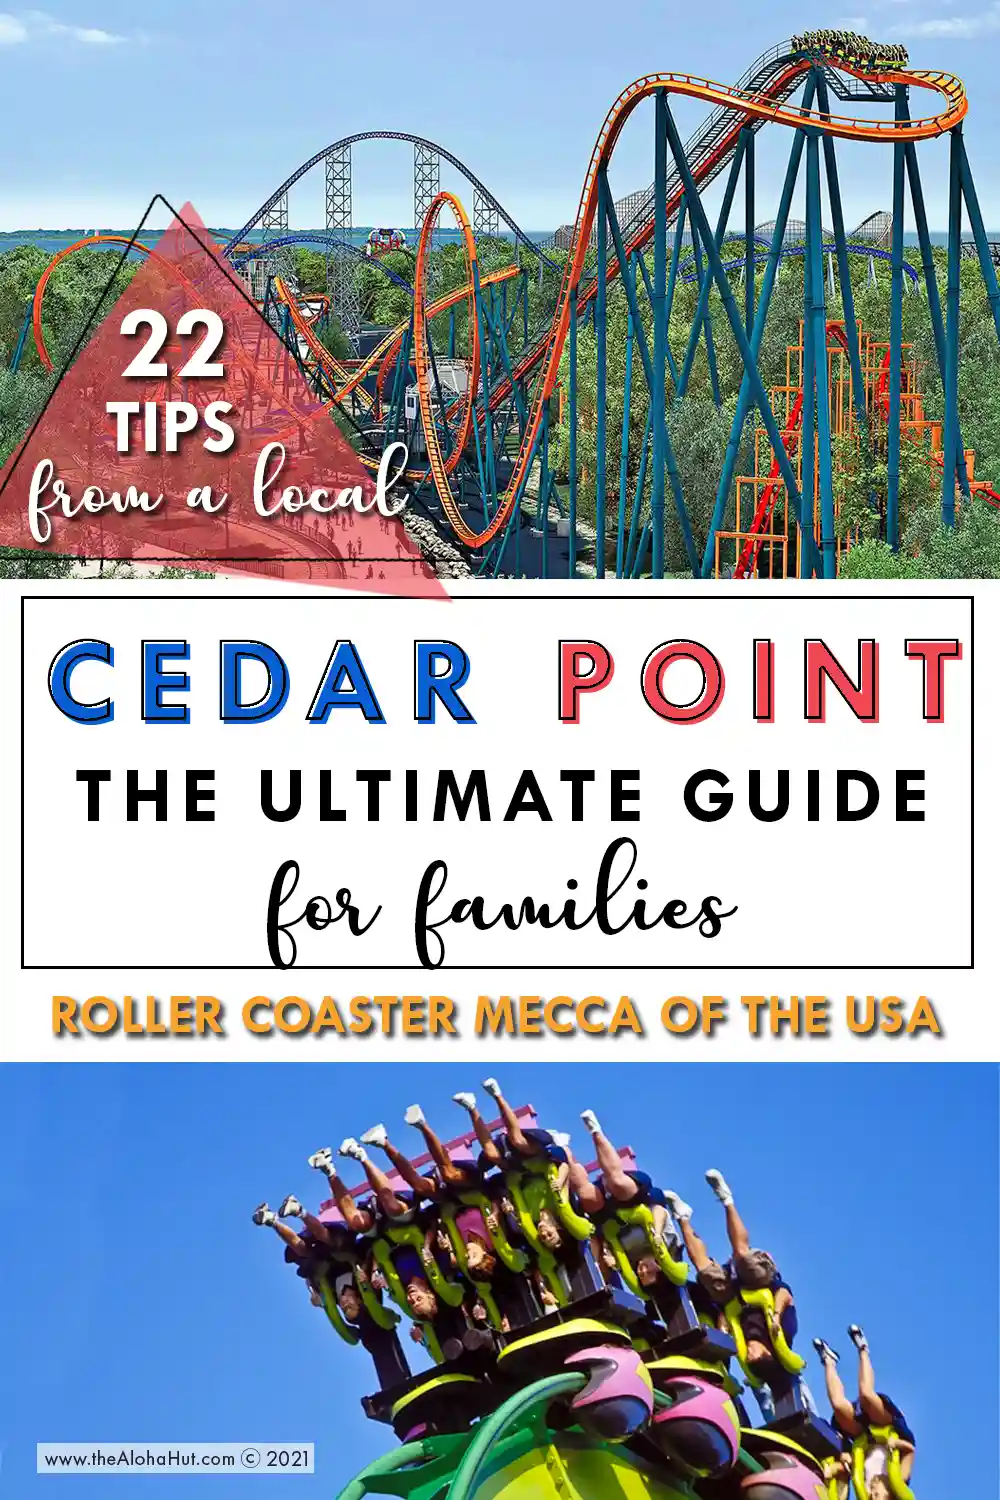 Cedar Point the Ultimate Guide for Families - Tips & Tricks